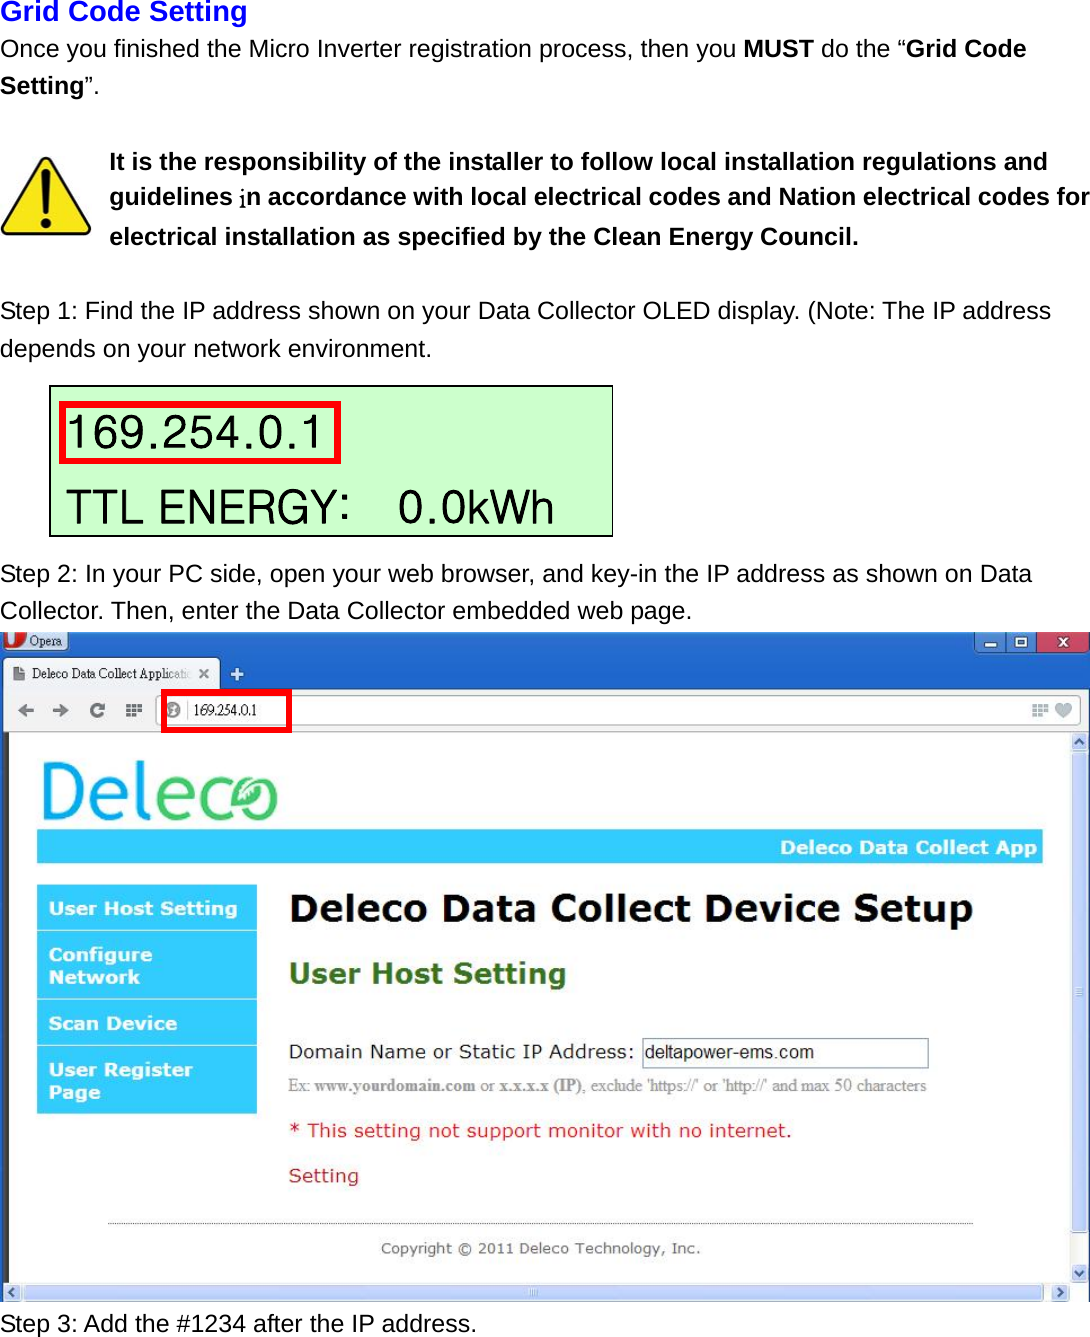 Grid Code Setting Once you finished the Micro Inverter registration process, then you MUST do the “Grid Code Setting”.  It is the responsibility of the installer to follow local installation regulations and guidelines in accordance with local electrical codes and Nation electrical codes for electrical installation as specified by the Clean Energy Council.  Step 1: Find the IP address shown on your Data Collector OLED display. (Note: The IP address depends on your network environment.      Step 2: In your PC side, open your web browser, and key-in the IP address as shown on Data Collector. Then, enter the Data Collector embedded web page.  Step 3: Add the #1234 after the IP address. 169.254.0.1 TTL ENERGY:    0.0kWh